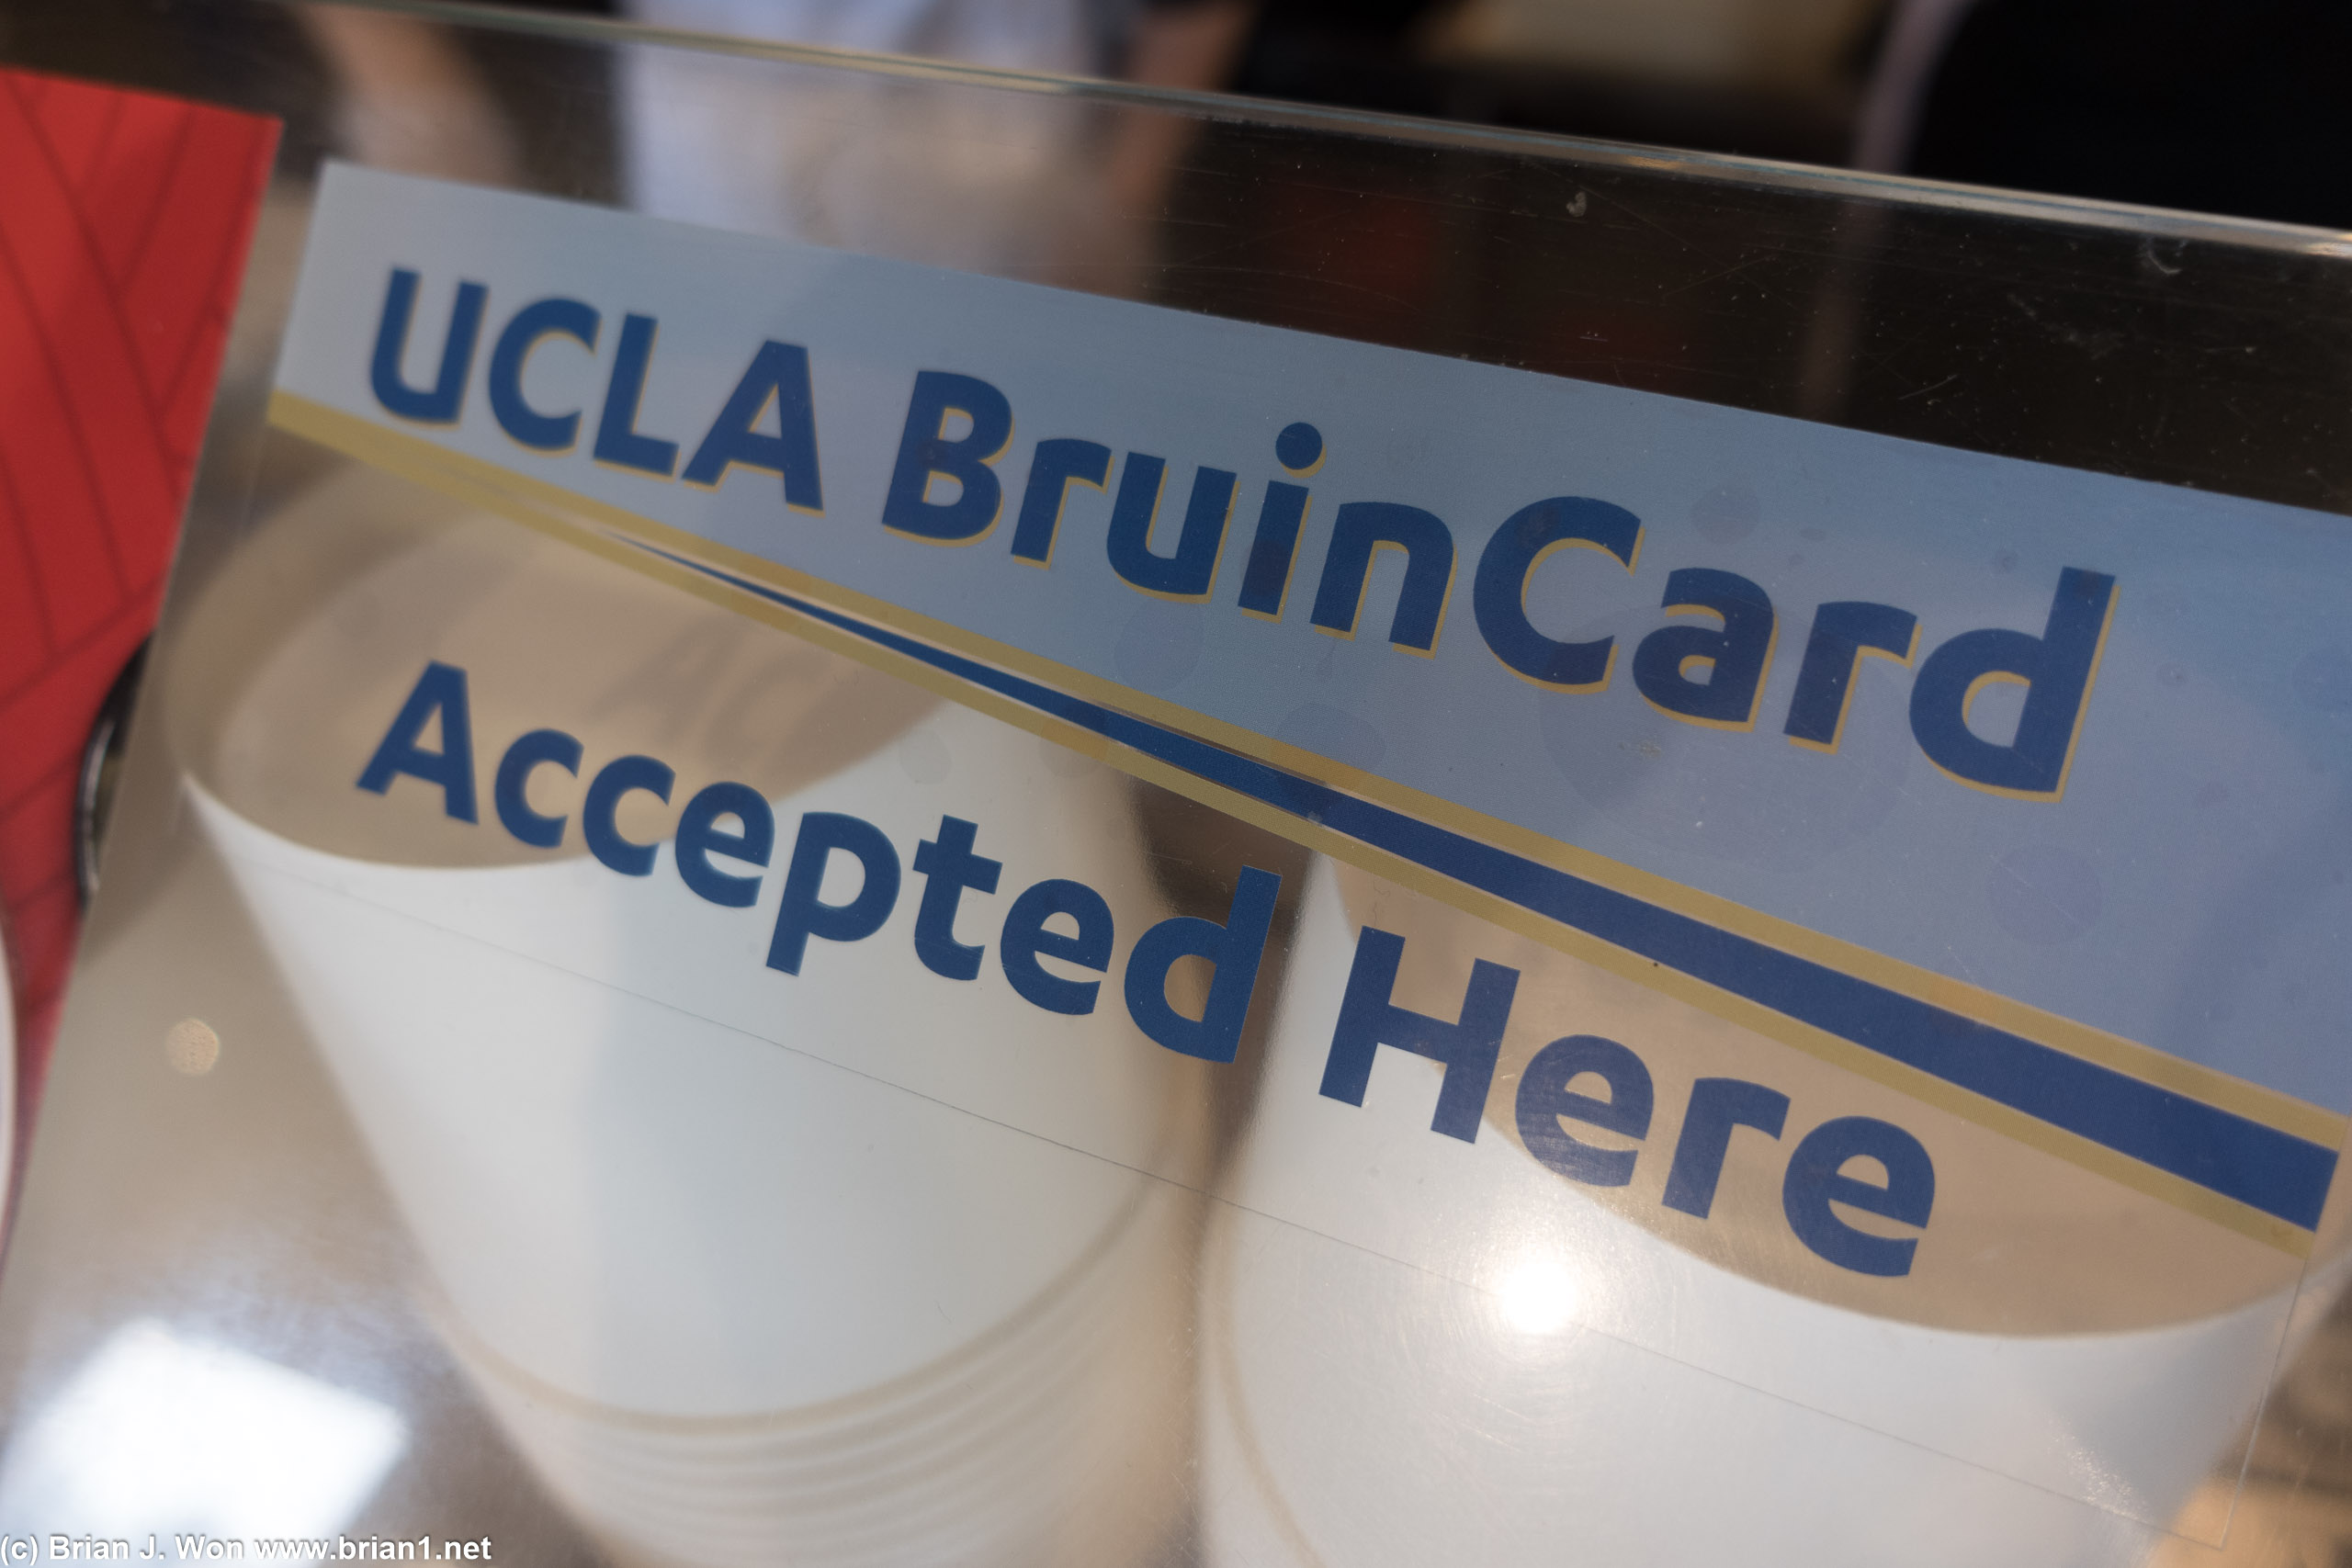 UCLA BruinCard accepted at Marugame Udon?